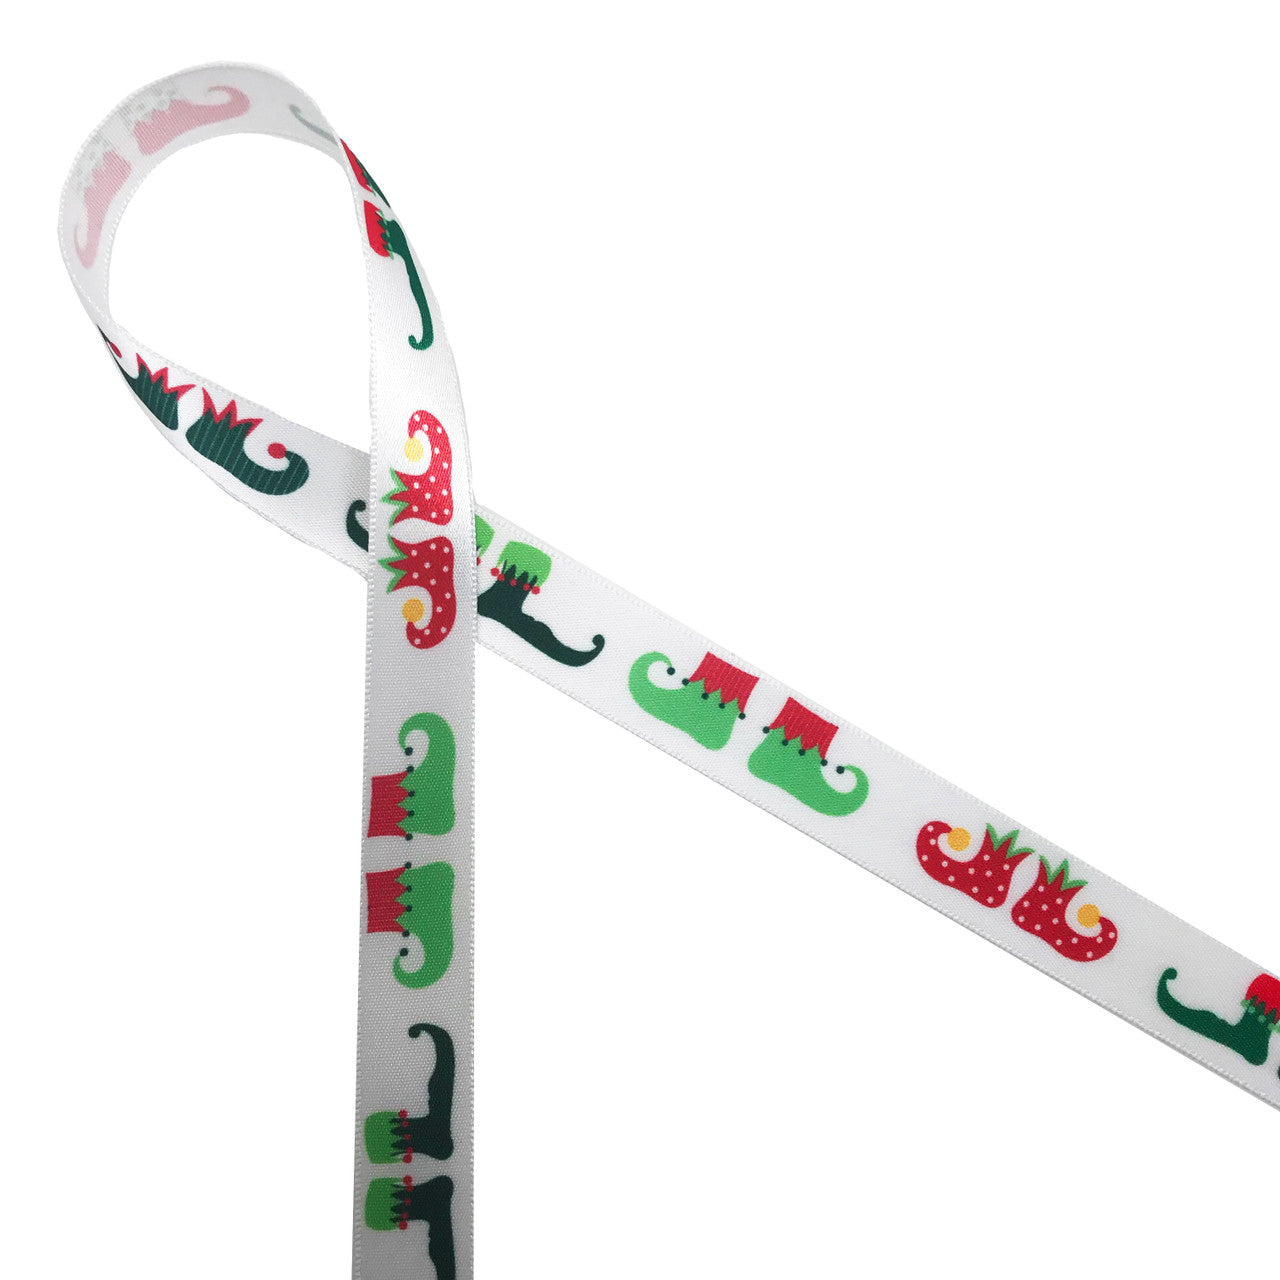 Adorable little elf shoes in holiday colors of red, green and black printed on 5/8" white single face satin ribbon is and ideal addition to your Holiday gifts, crafts, favors and decor!